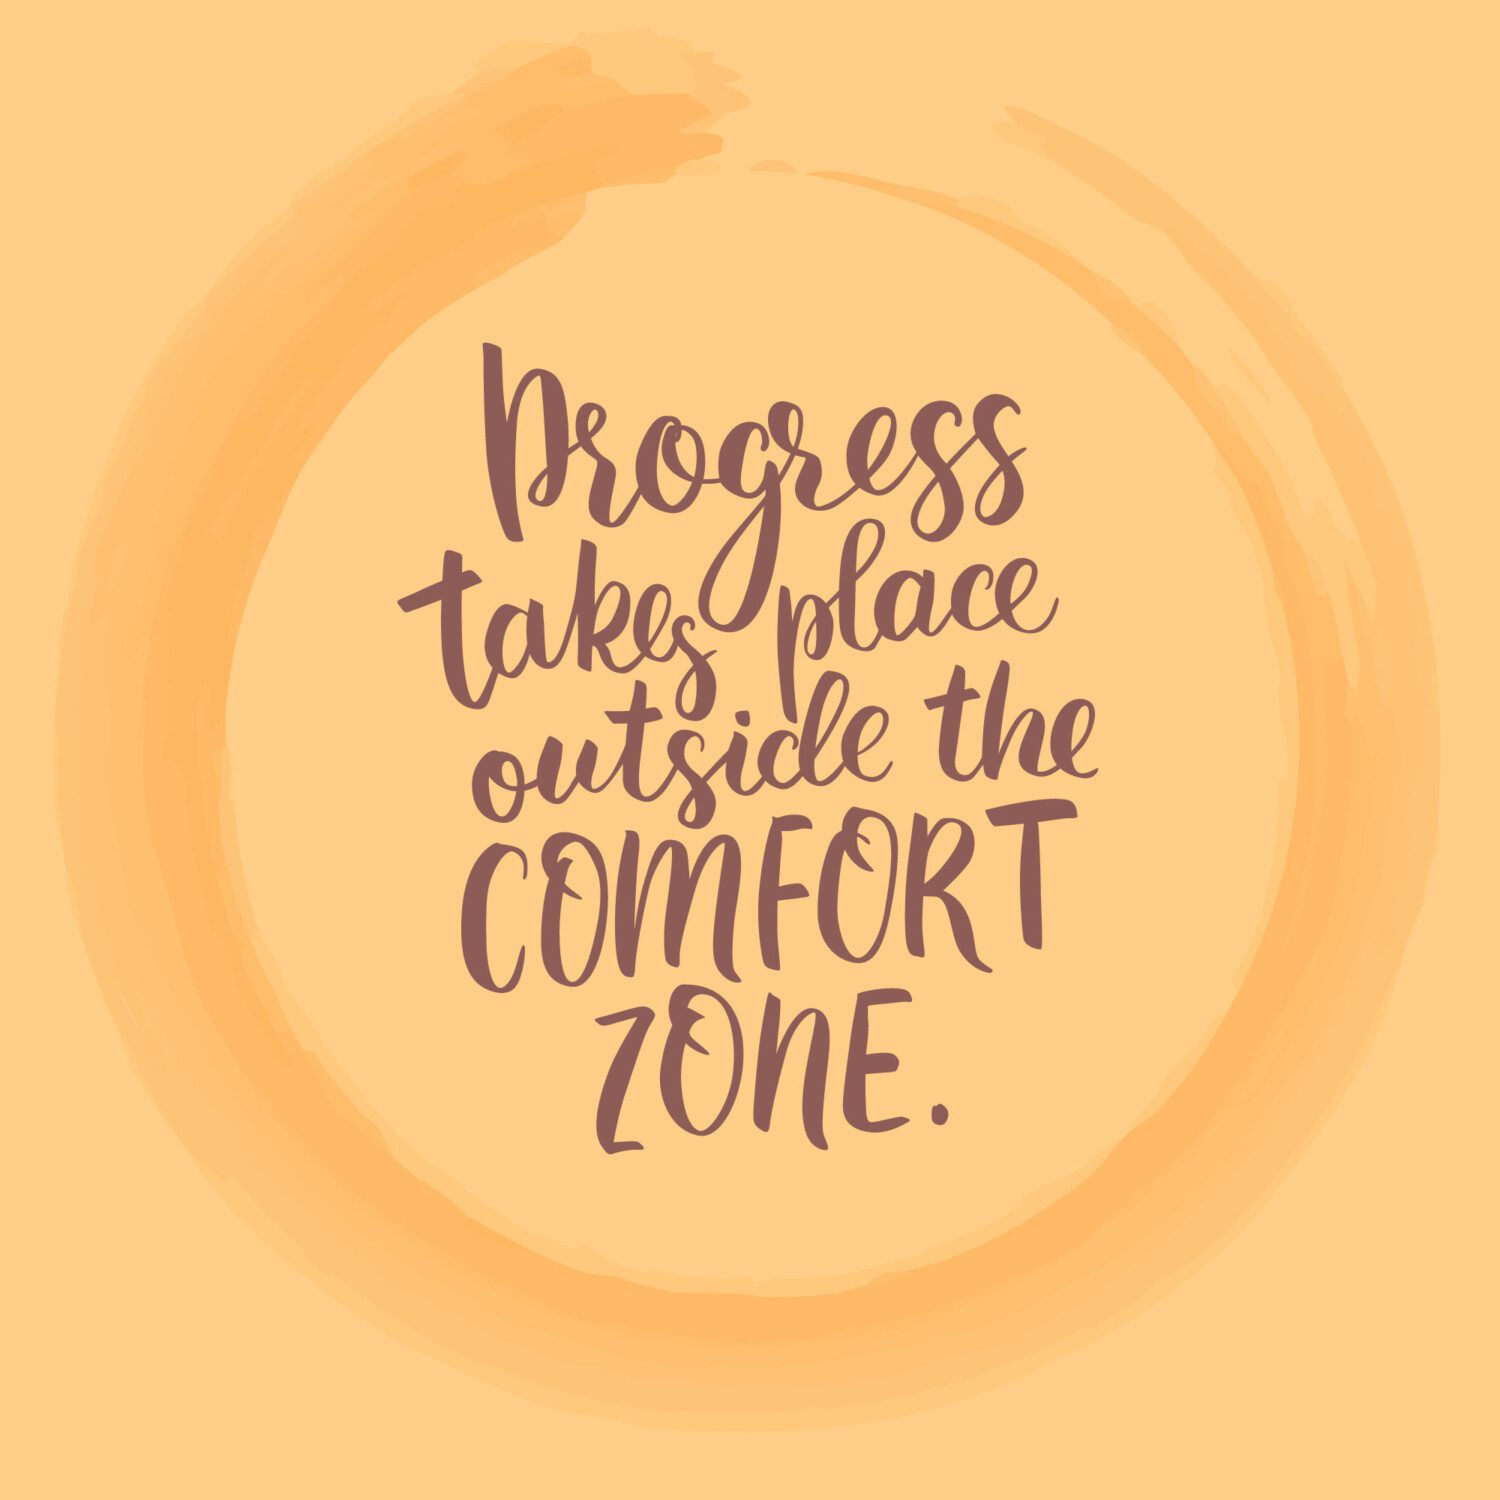 Progress takes place outside the comfort zone.